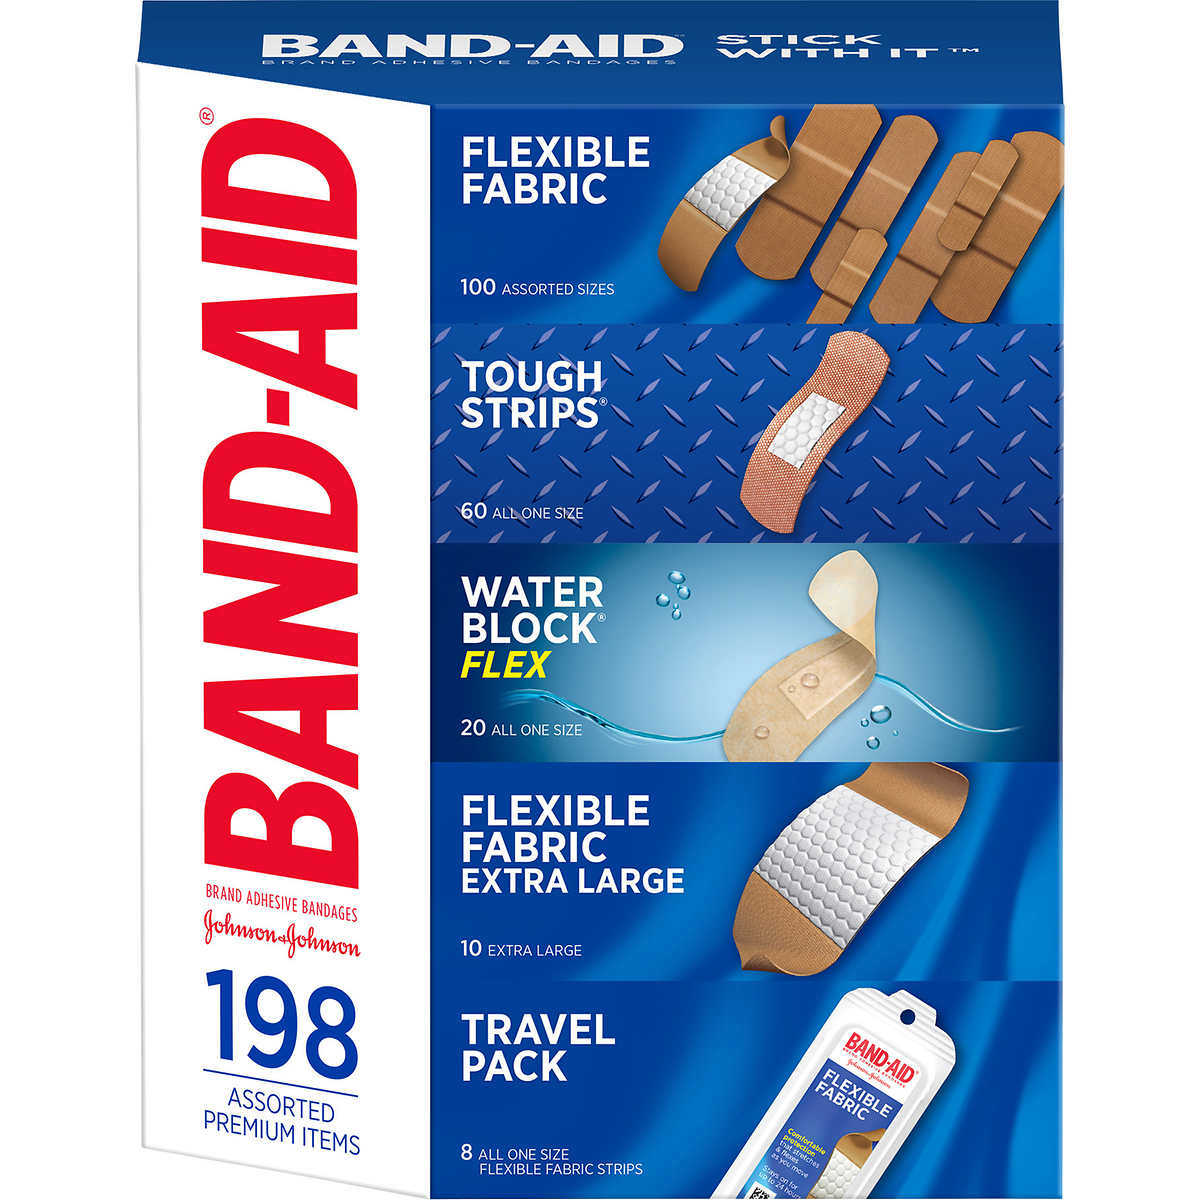 BAND-AID Bandages Travel Kit 8 Each (Pack of 2)